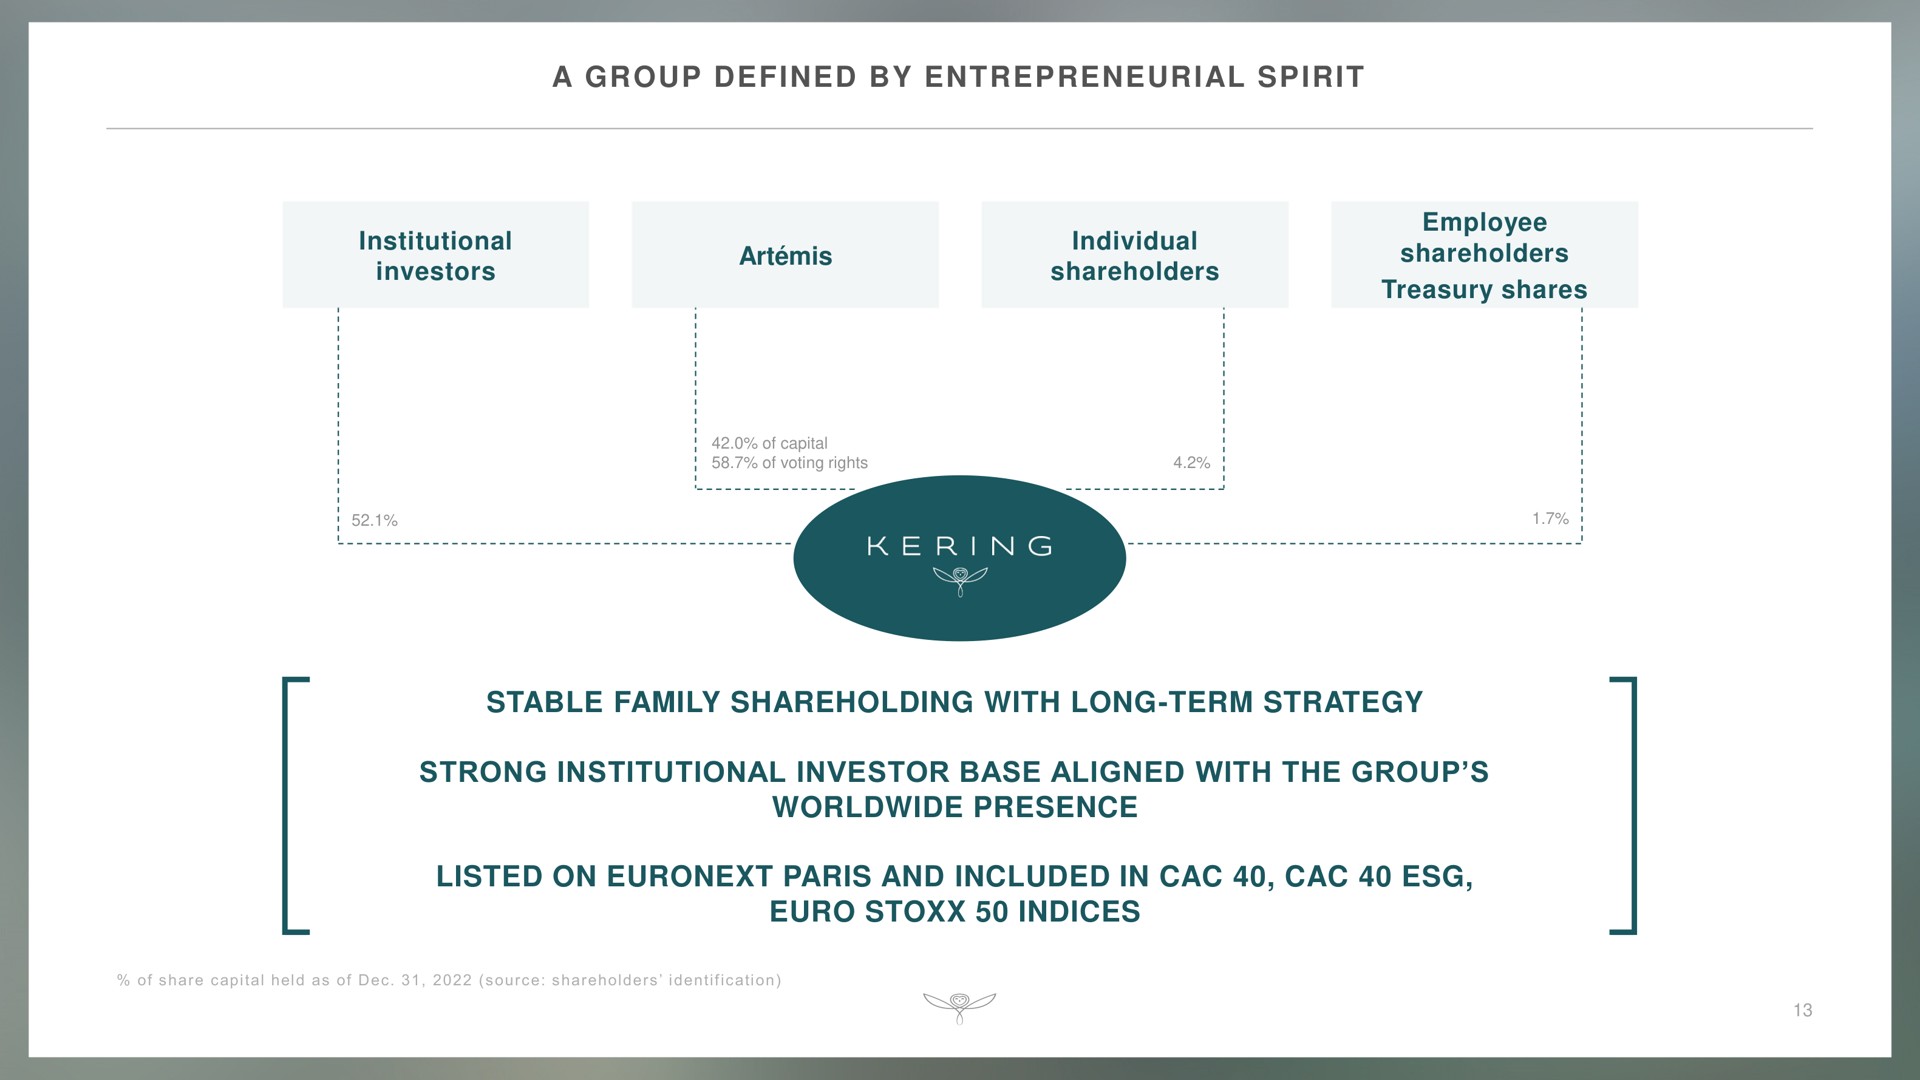 a group defined by entrepreneurial spirit institutional investors art mis individual shareholders employee shareholders treasury shares stable family with long term strategy strong institutional investor base aligned with the group presence listed on and included in indices of capital | Kering